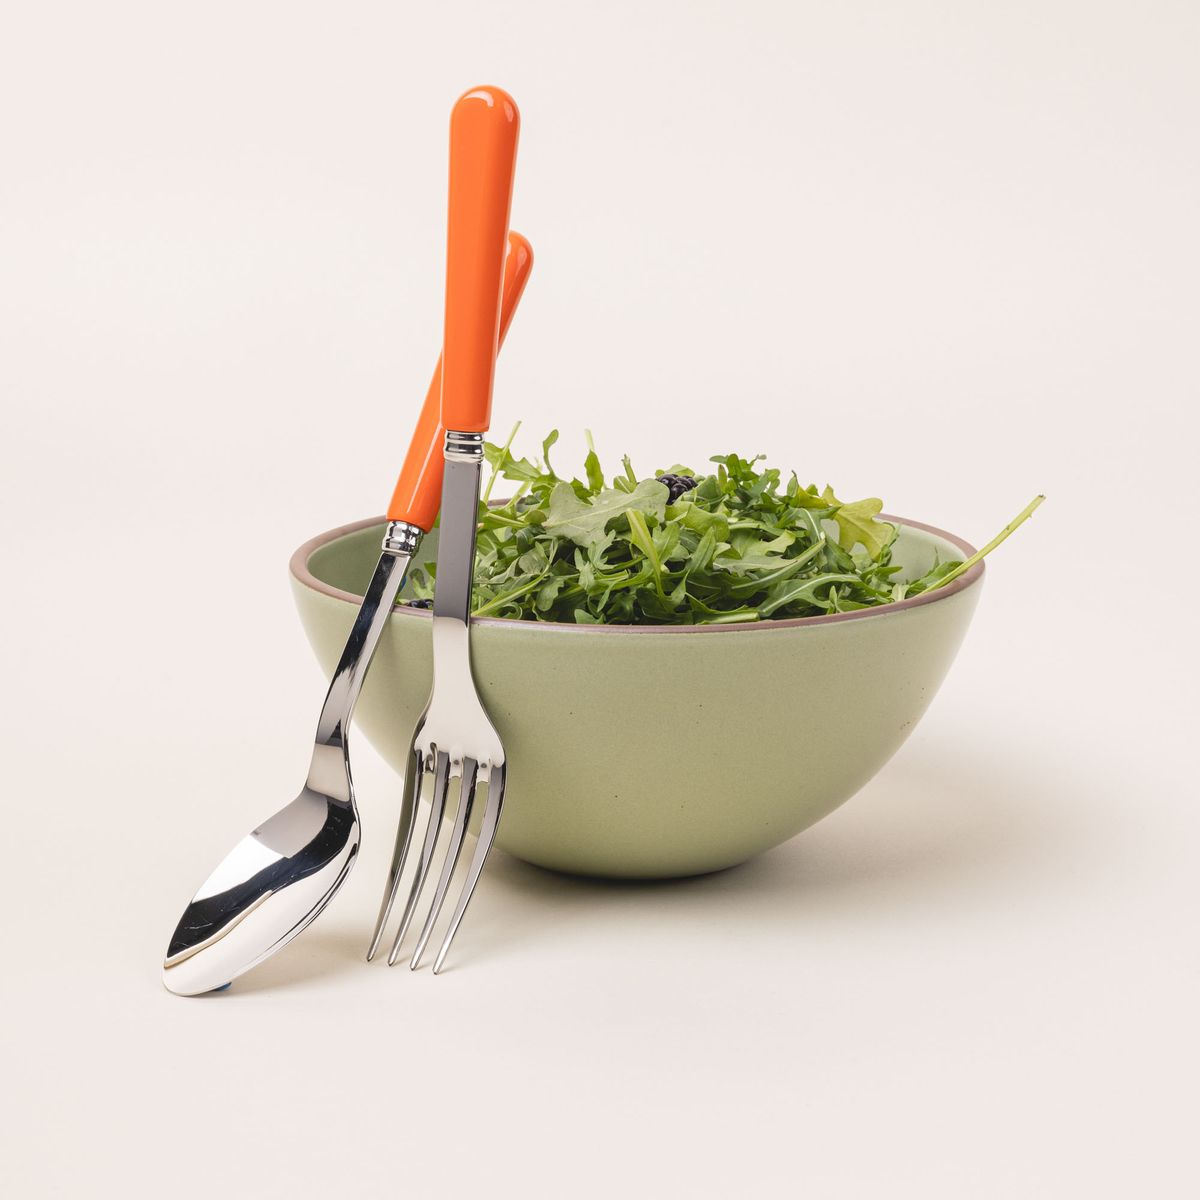 A serving size spoon and fork in a shiny steel with a bold orange handle sits against a calming sage green ceramic bowl filled with salad.